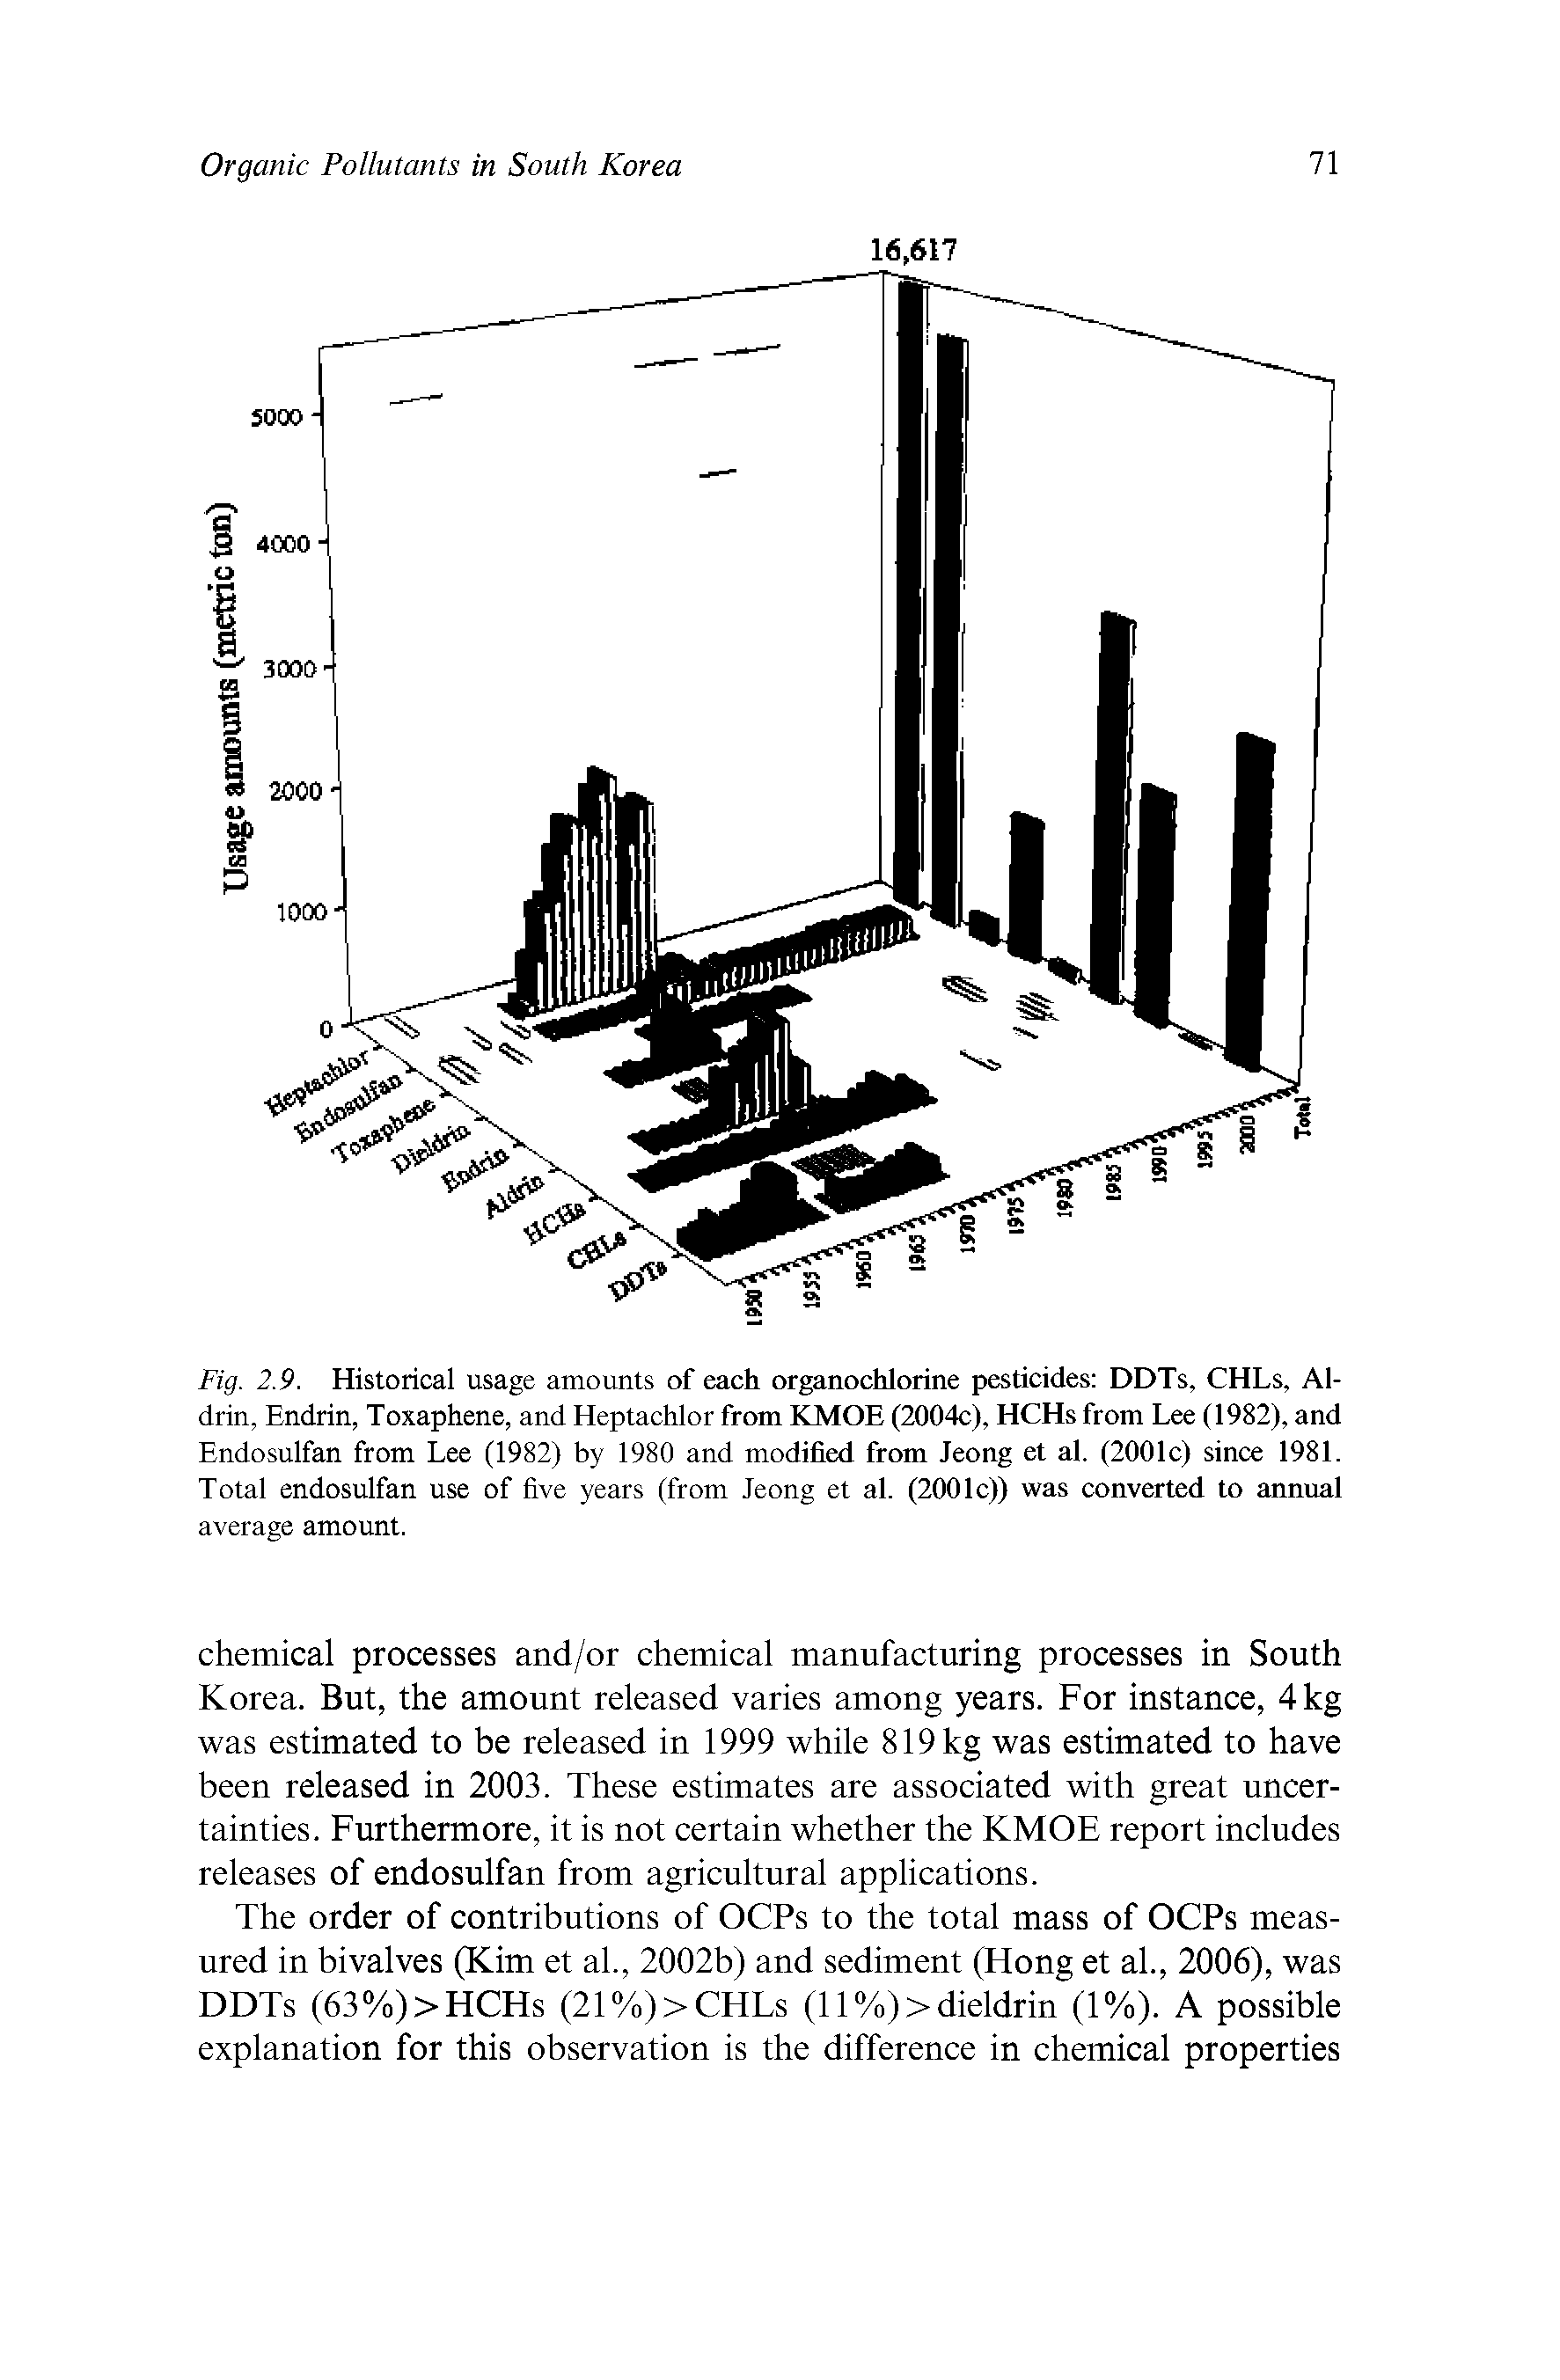 Fig. 2.9. Historical usage amounts of each organochlorine pesticides DDTs, CHLs, Al-drin, Endrin, Toxaphene, and Heptachlor from KMOE (2004c), HCHs from Lee (1982), and Endosulfan from Lee (1982) by 1980 and modified from Jeong et al. (2001c) since 1981. Total endosulfan use of five years (from Jeong et al. (2001c)) was converted to annual average amount.